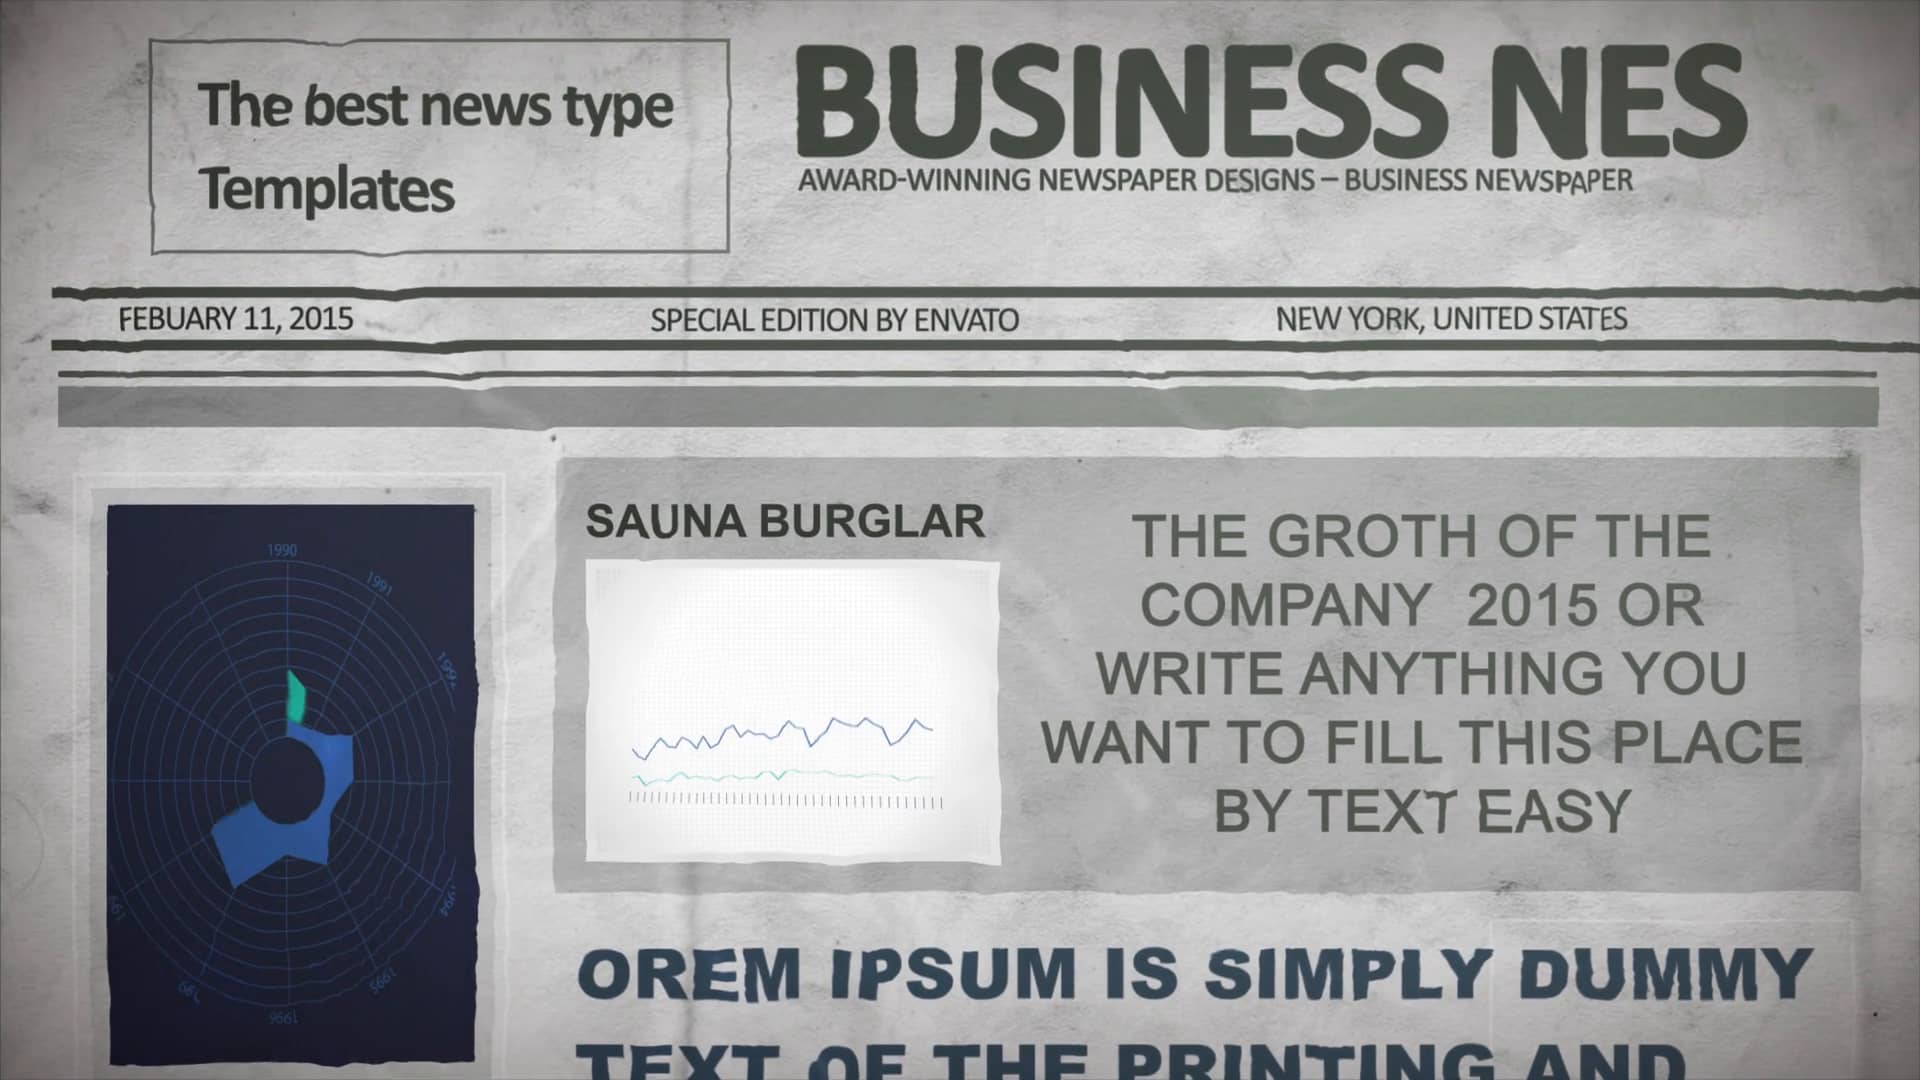 Business Newspaper After Effects Project Template on Vimeo